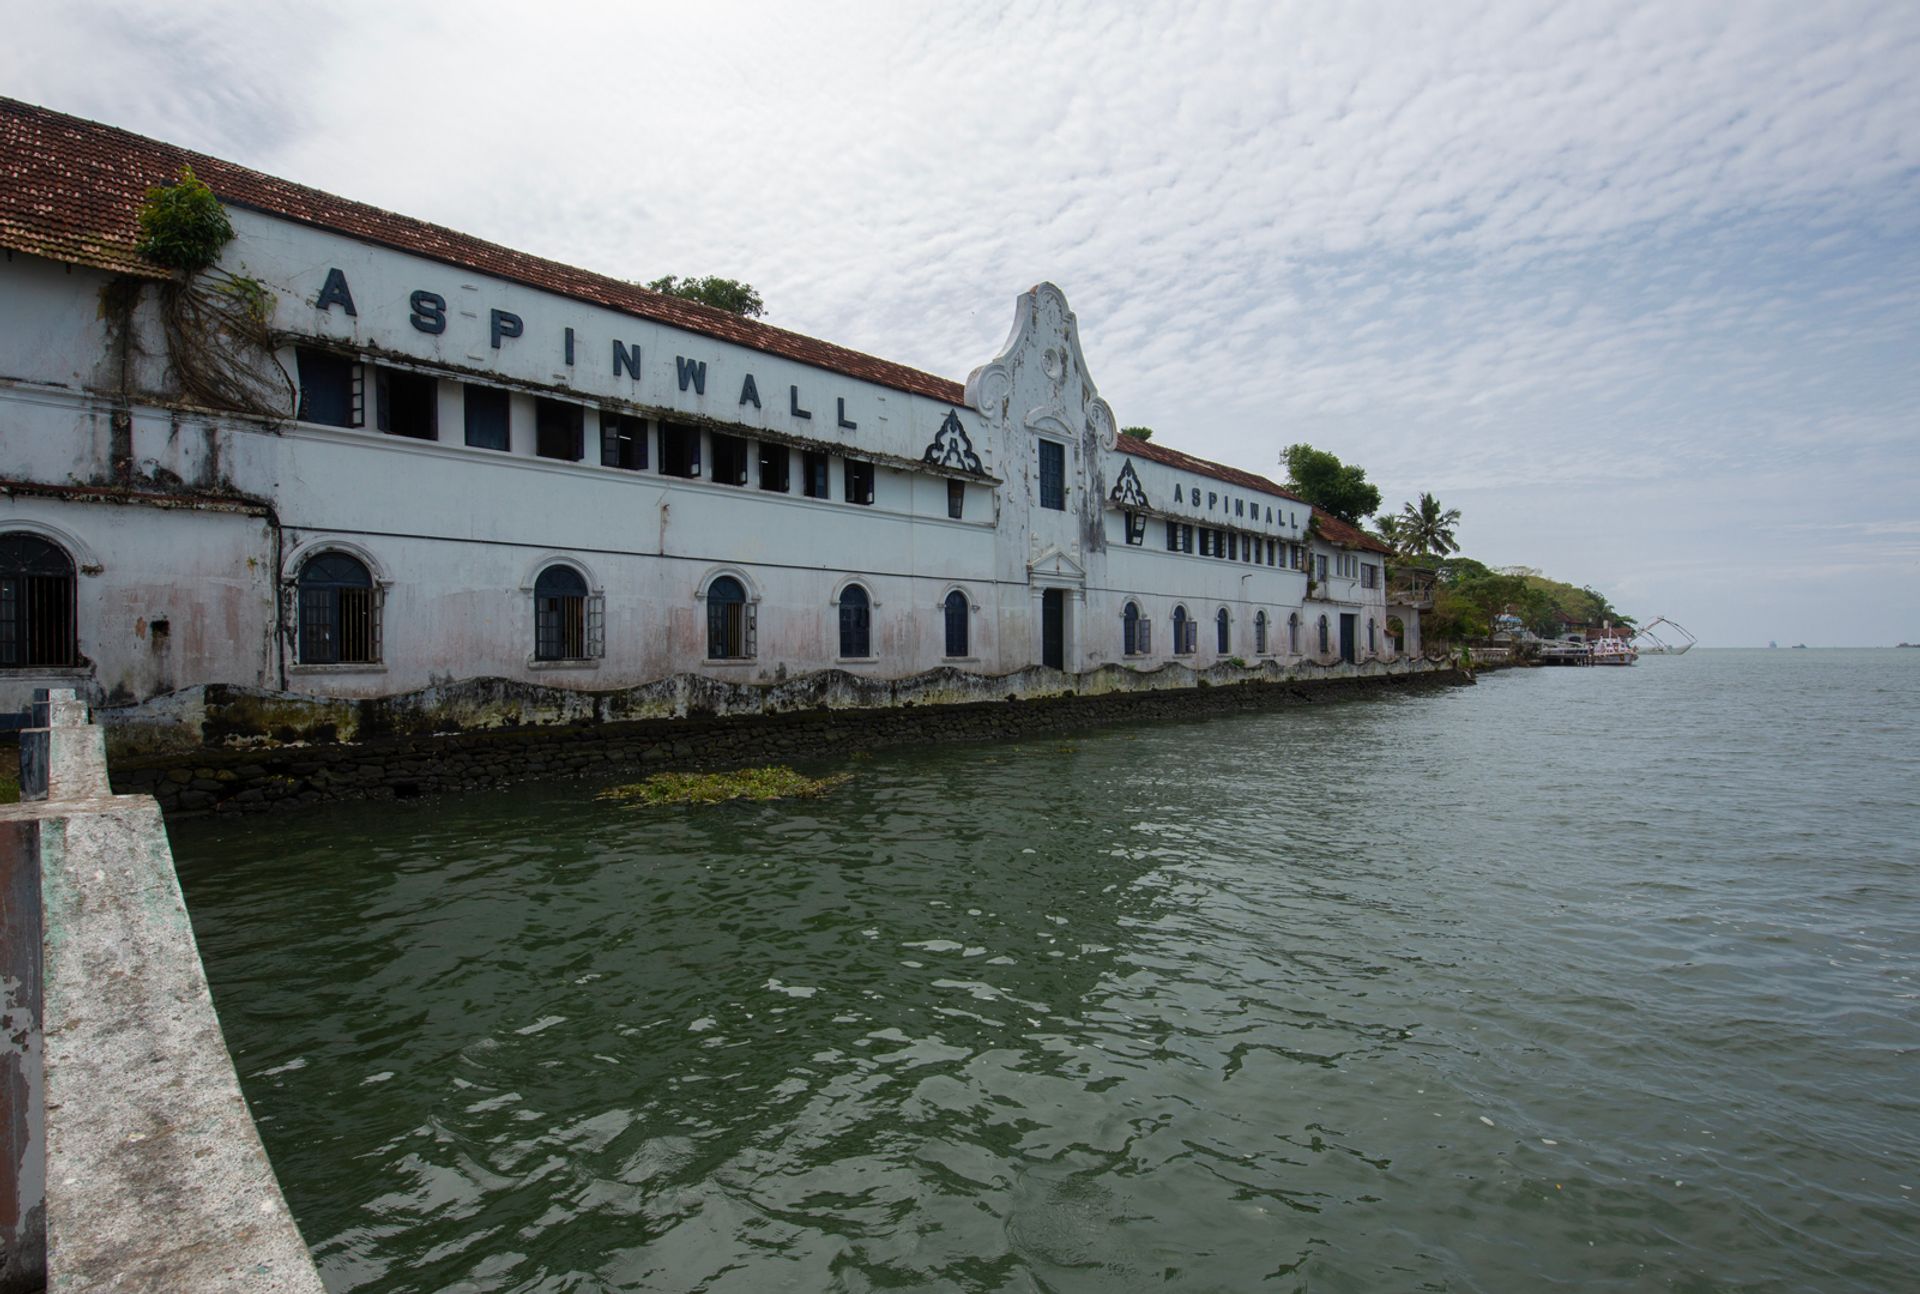 Aspinwall House is one of the Kochi-Muziris Biennale venues not yet ready to open to the public Courtesy of Kochi Biennale Foundation